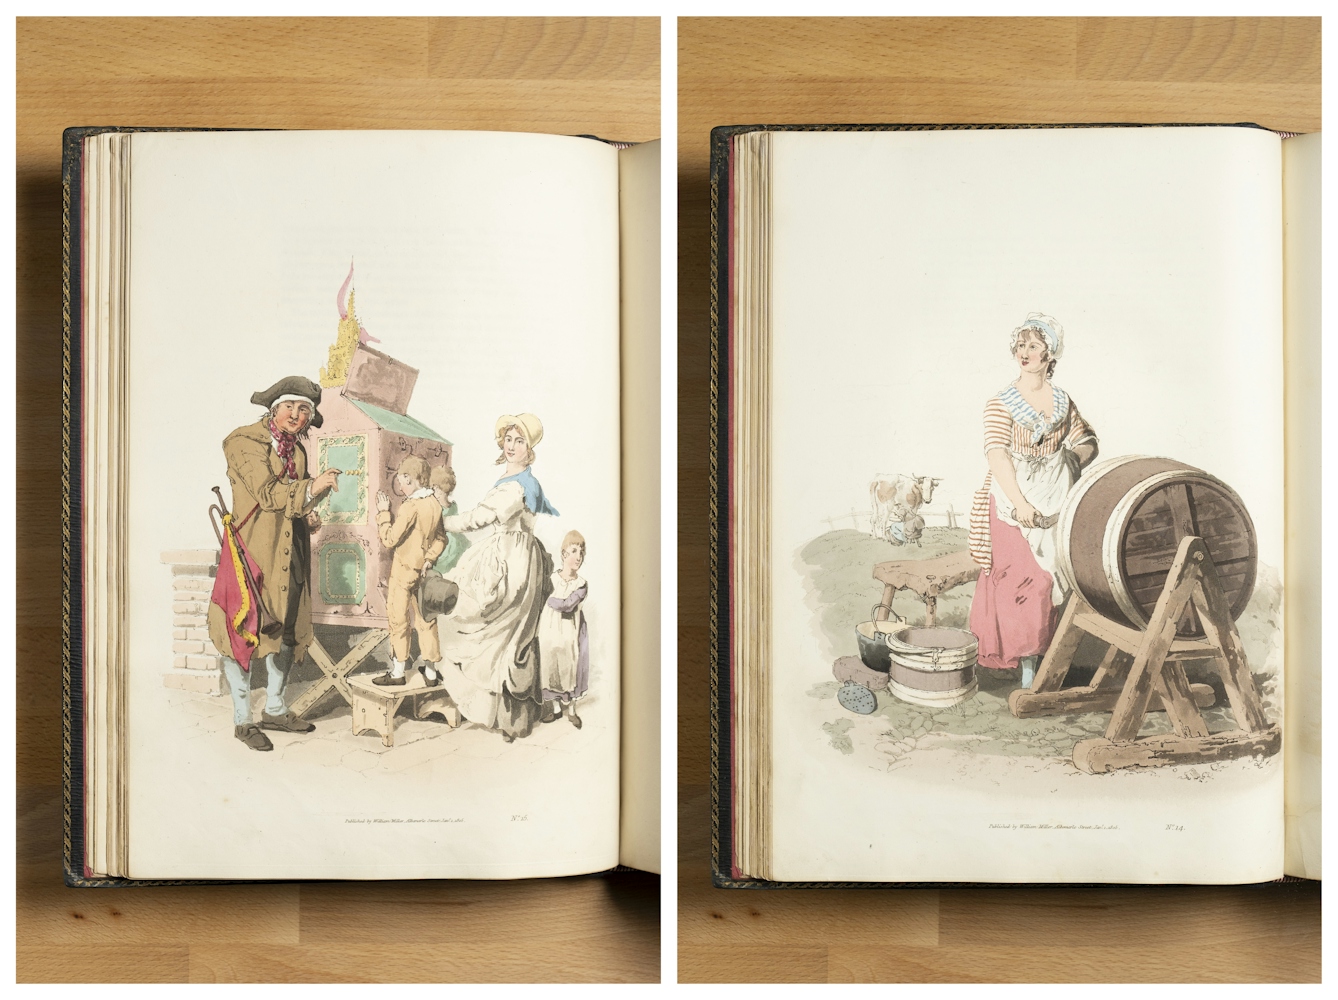 Two photographs of a book containing colour illustrations. On the left is an illustration of an upper class lady with children looking at an attraction at the fair. On the right is a working class woman turning the handle on a milk churning barrel. 